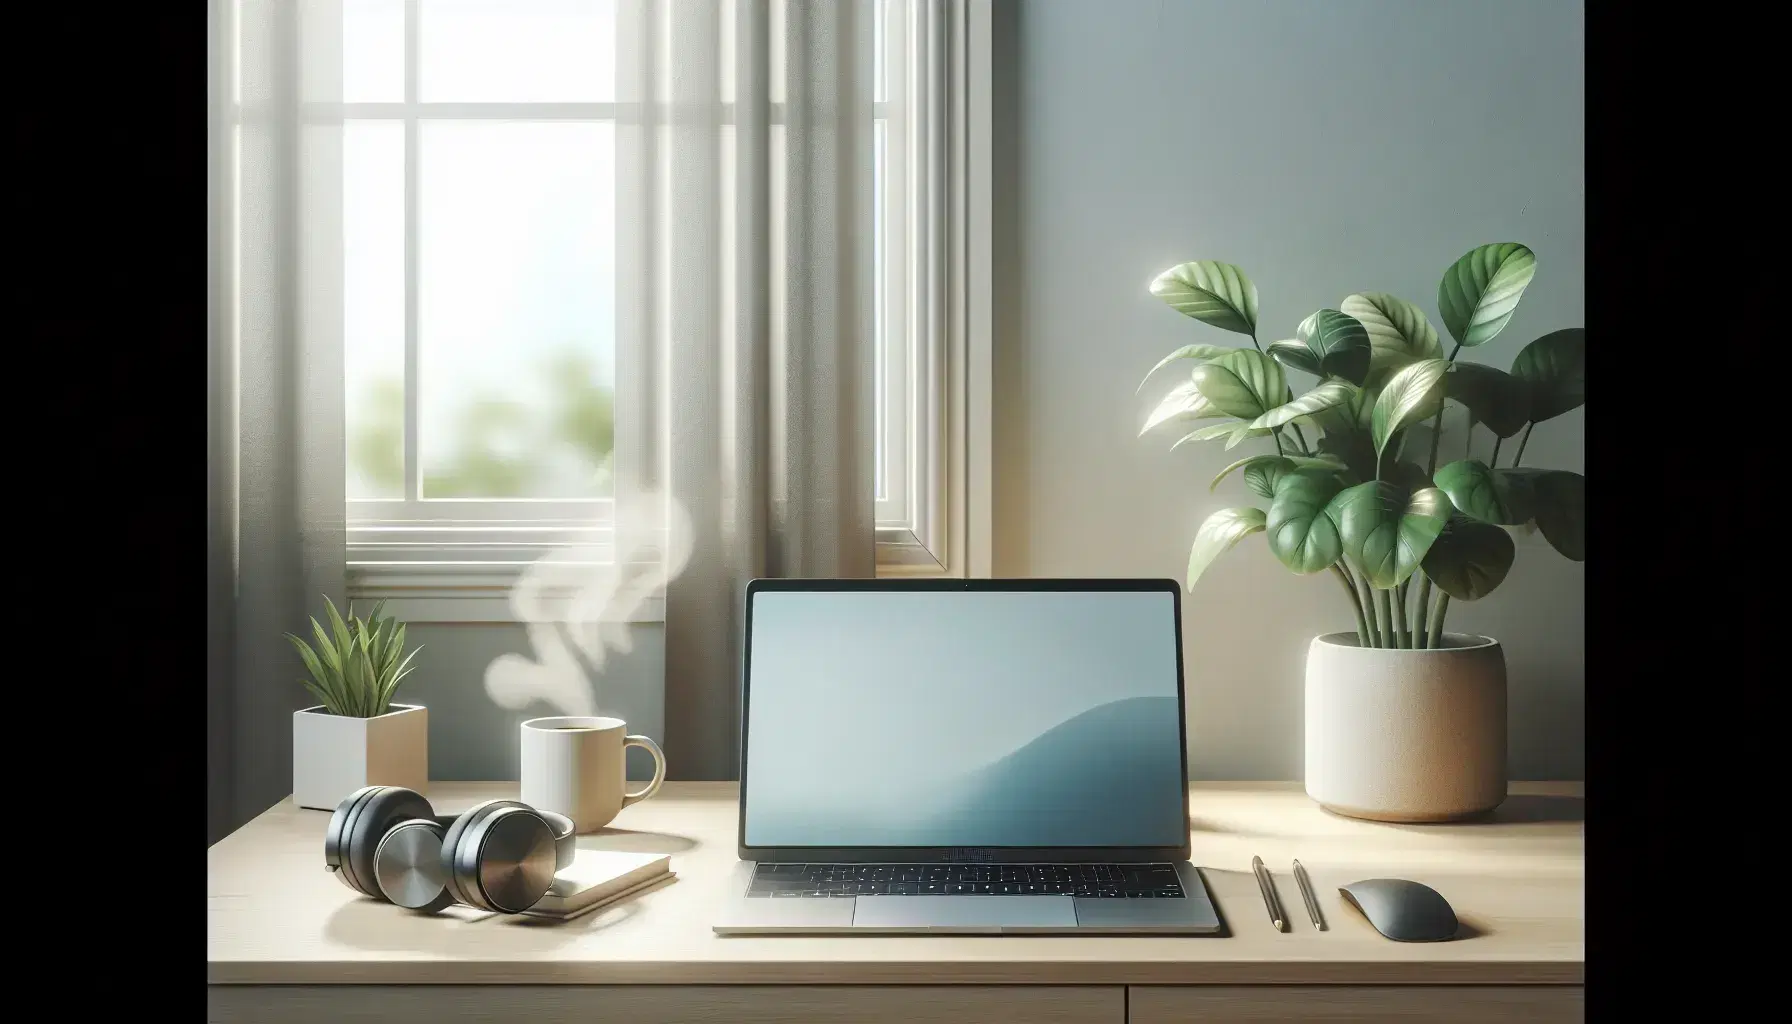 Tidy desk with modern laptop, steaming cup of coffee, black headphones and green potted plant, illuminated by natural light.